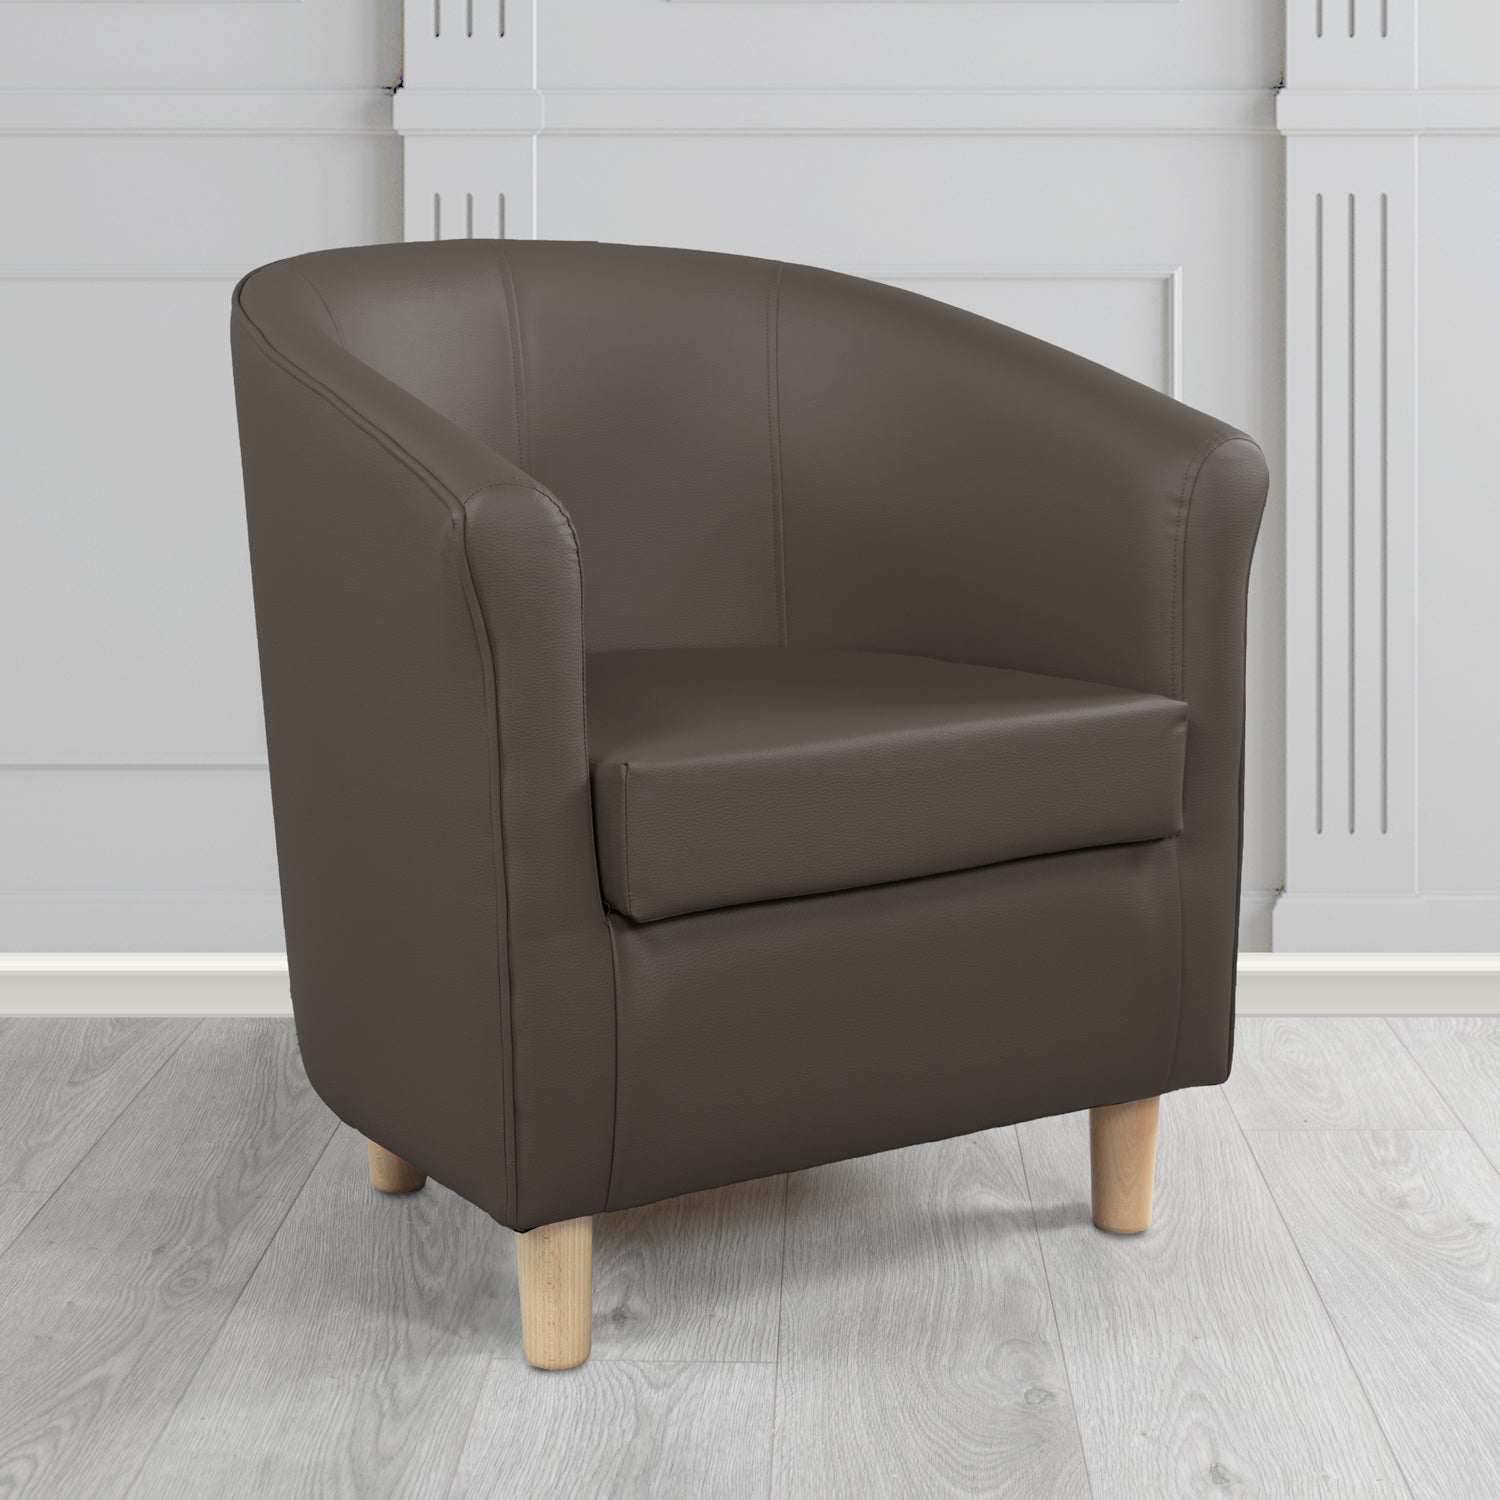 Tuscany Tub Chair in Madrid Chocolate Faux Leather